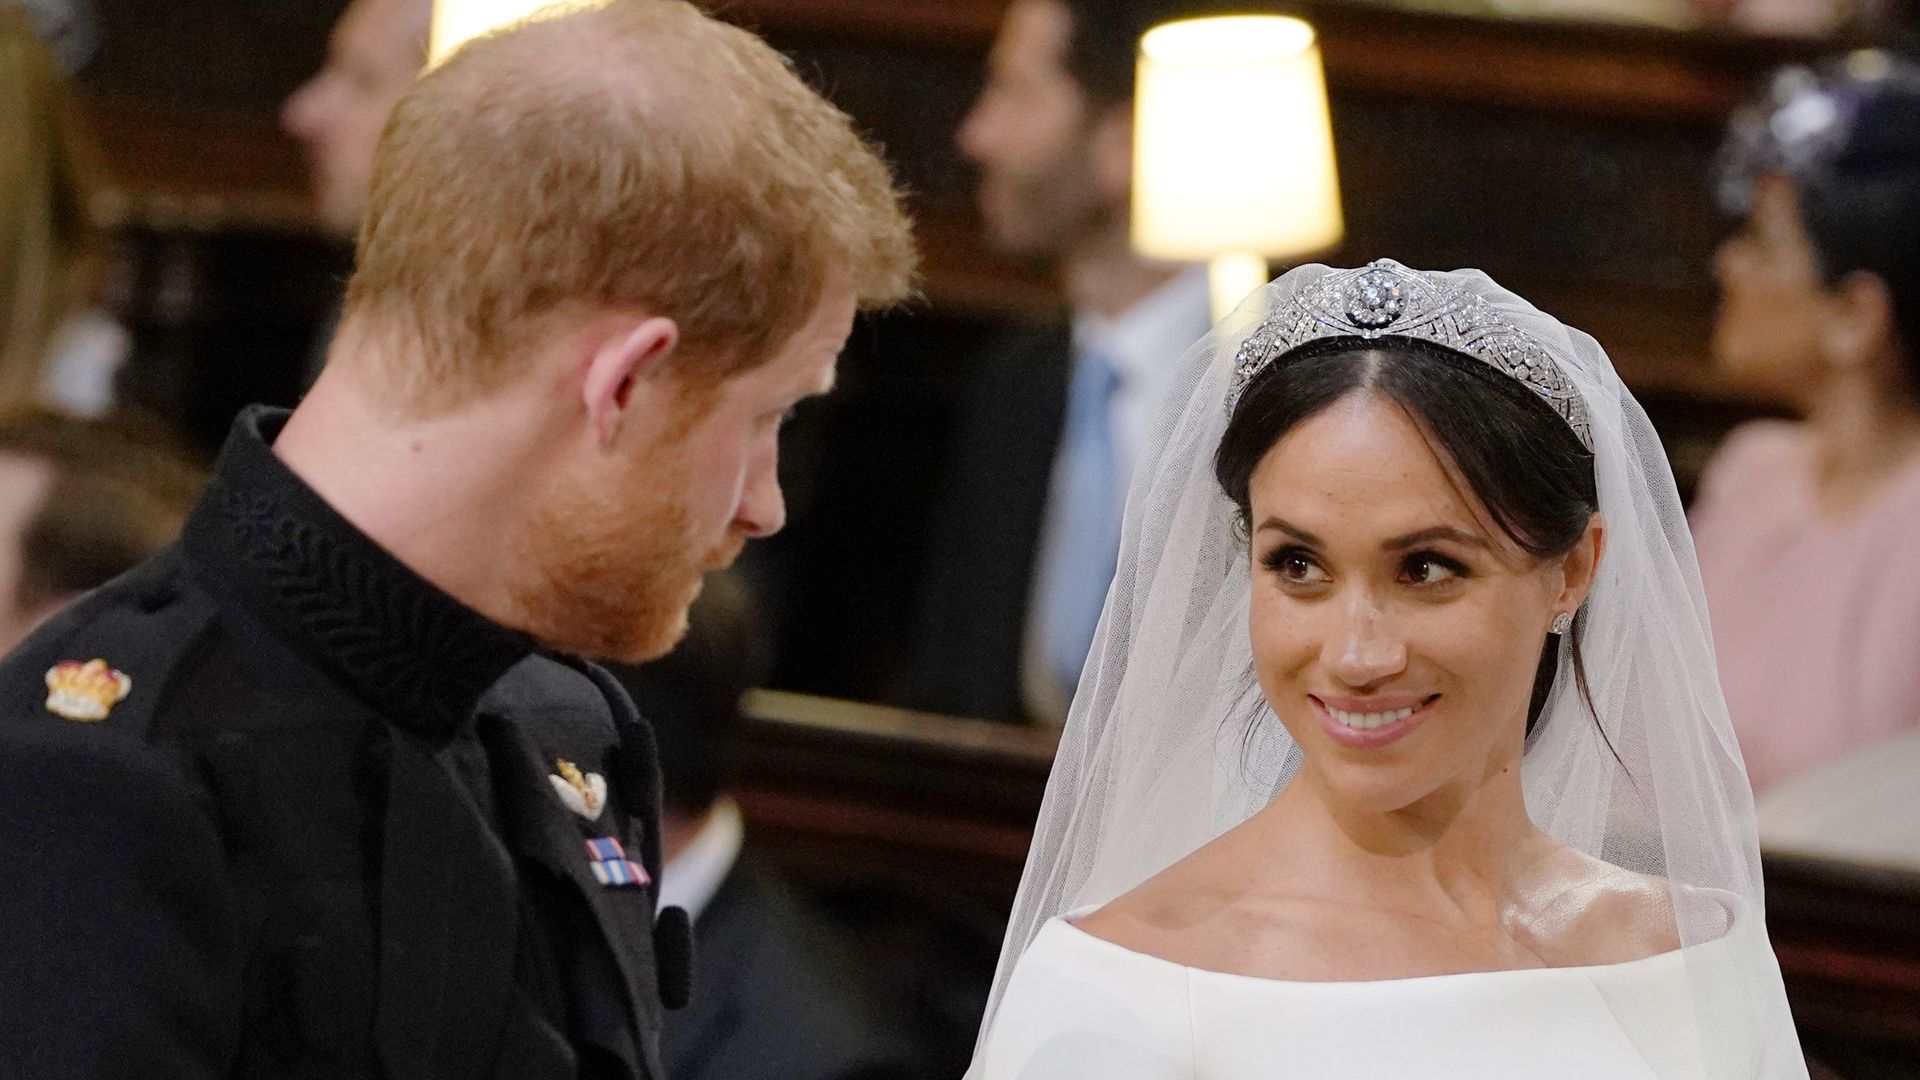 Prince Harry reveals truth behind Meghan Markle's tiara fitting